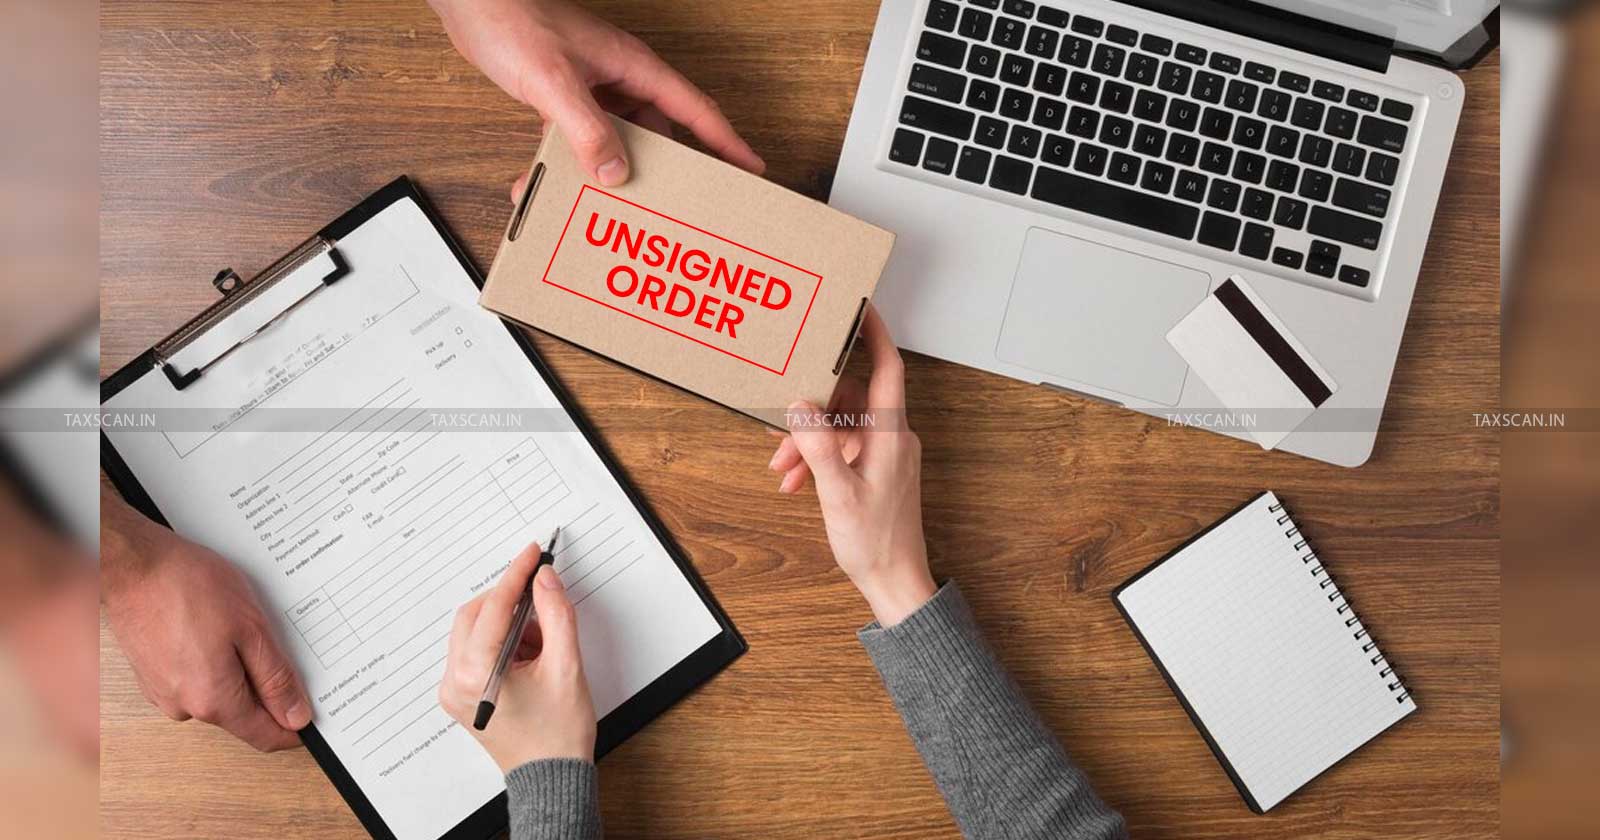 Unsigned Order - Invalid-AP HC - Demand Order - GST Act-TAXSCAN